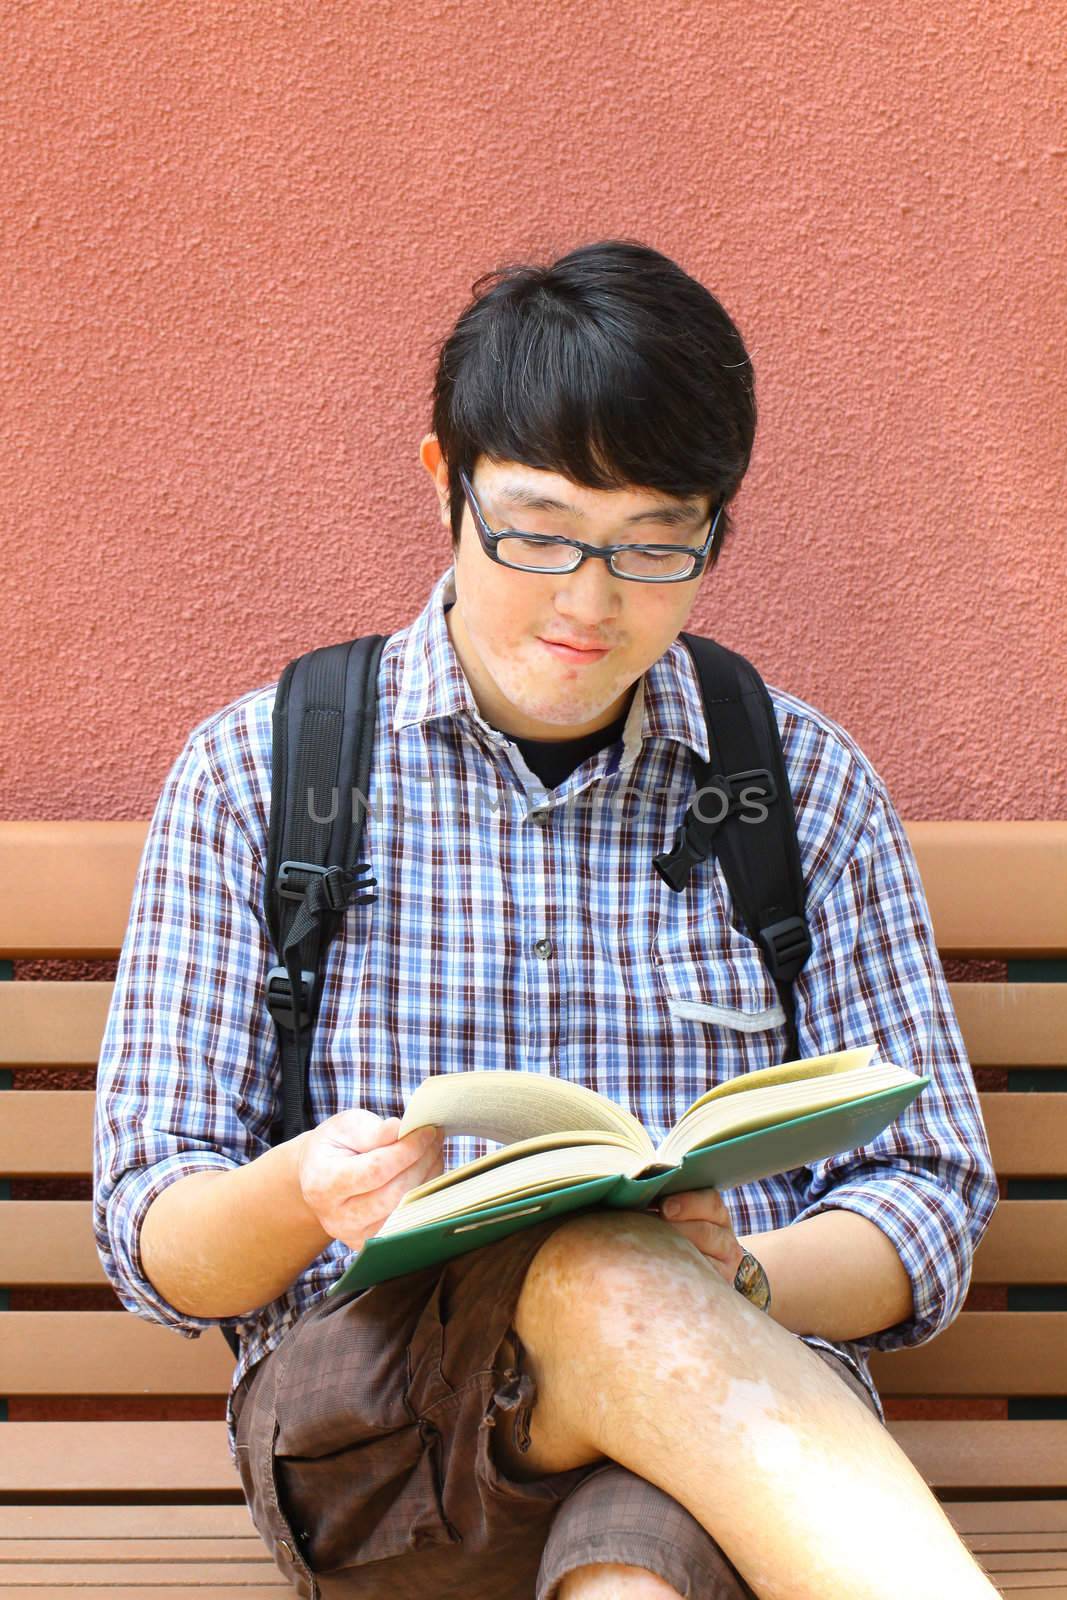 He is reading book on campus.